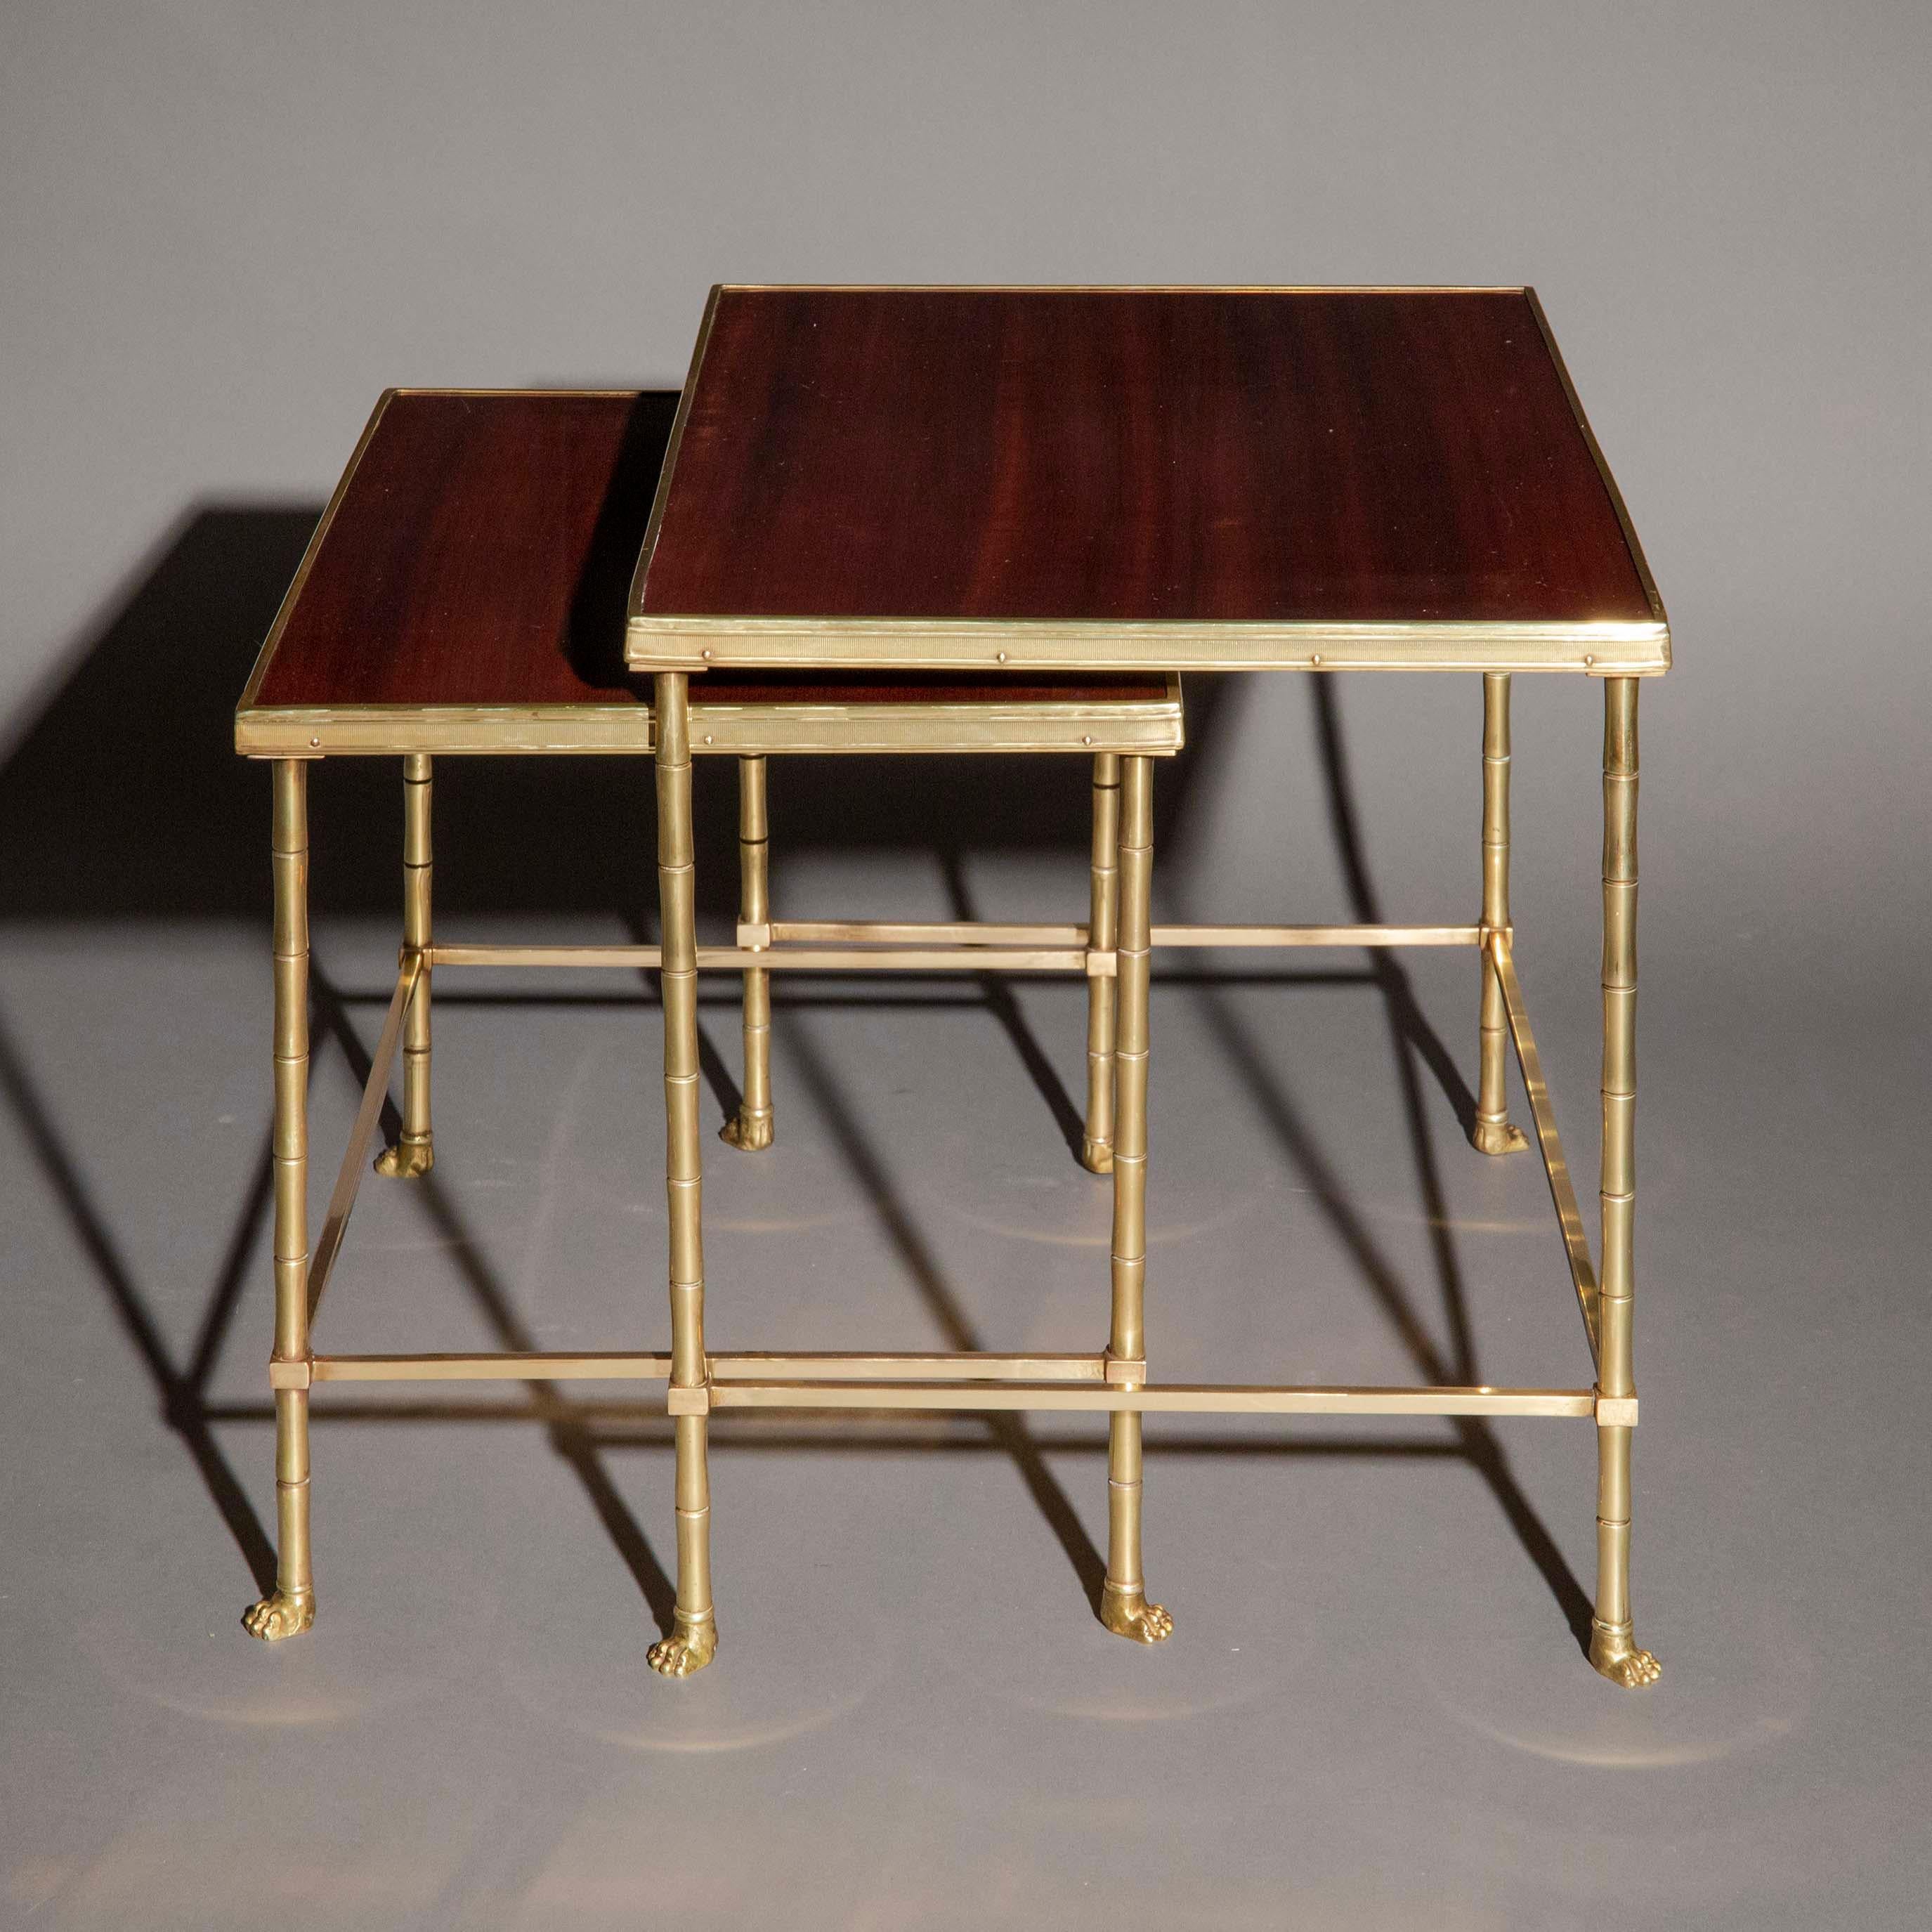 A fine quality graduated pair of low tables or cocktail tables, on faux bamboo brass legs with paw feet and polished veneered tops, in the style of Maison Baguès. France, mid-20th century

Why we like them
Evoking the elegant Directoire-era